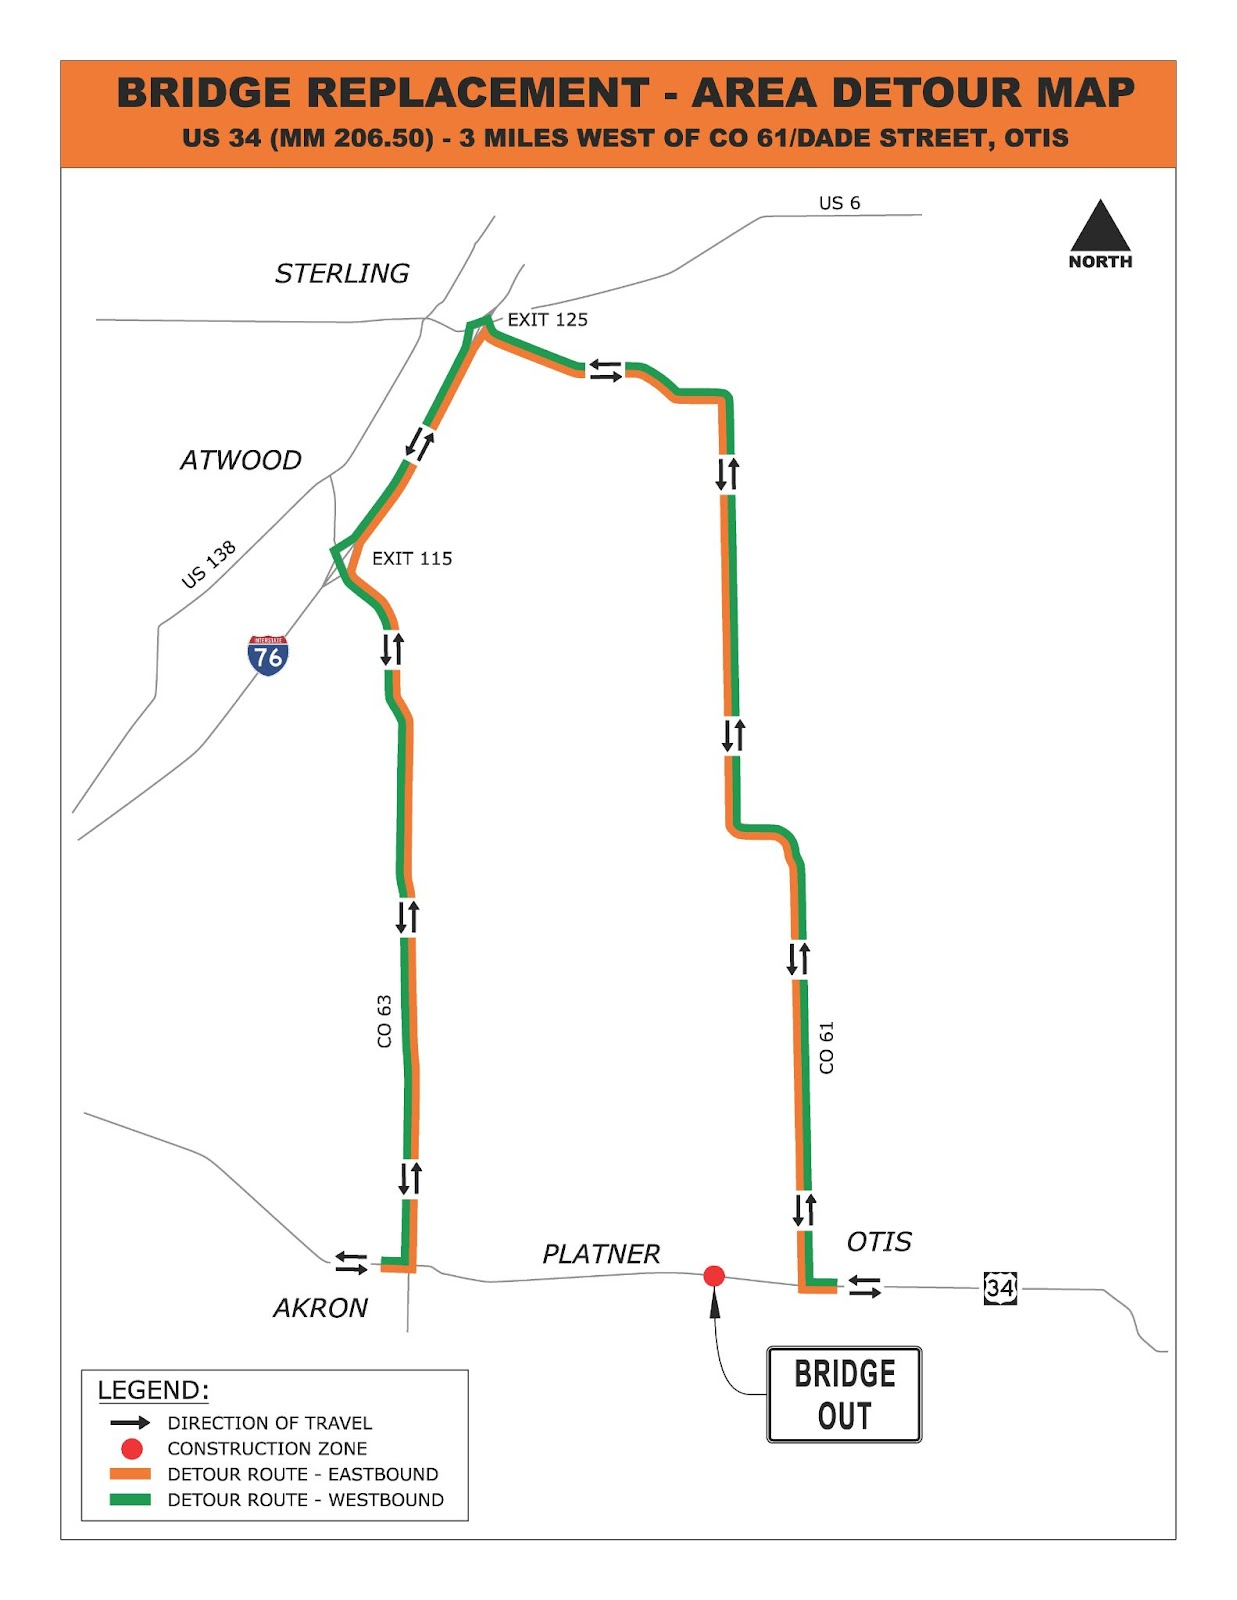 Bridge Replacement Area Detour Map on US 34 3 Miles west of CO 6-Dade Street OTIS.png detail image